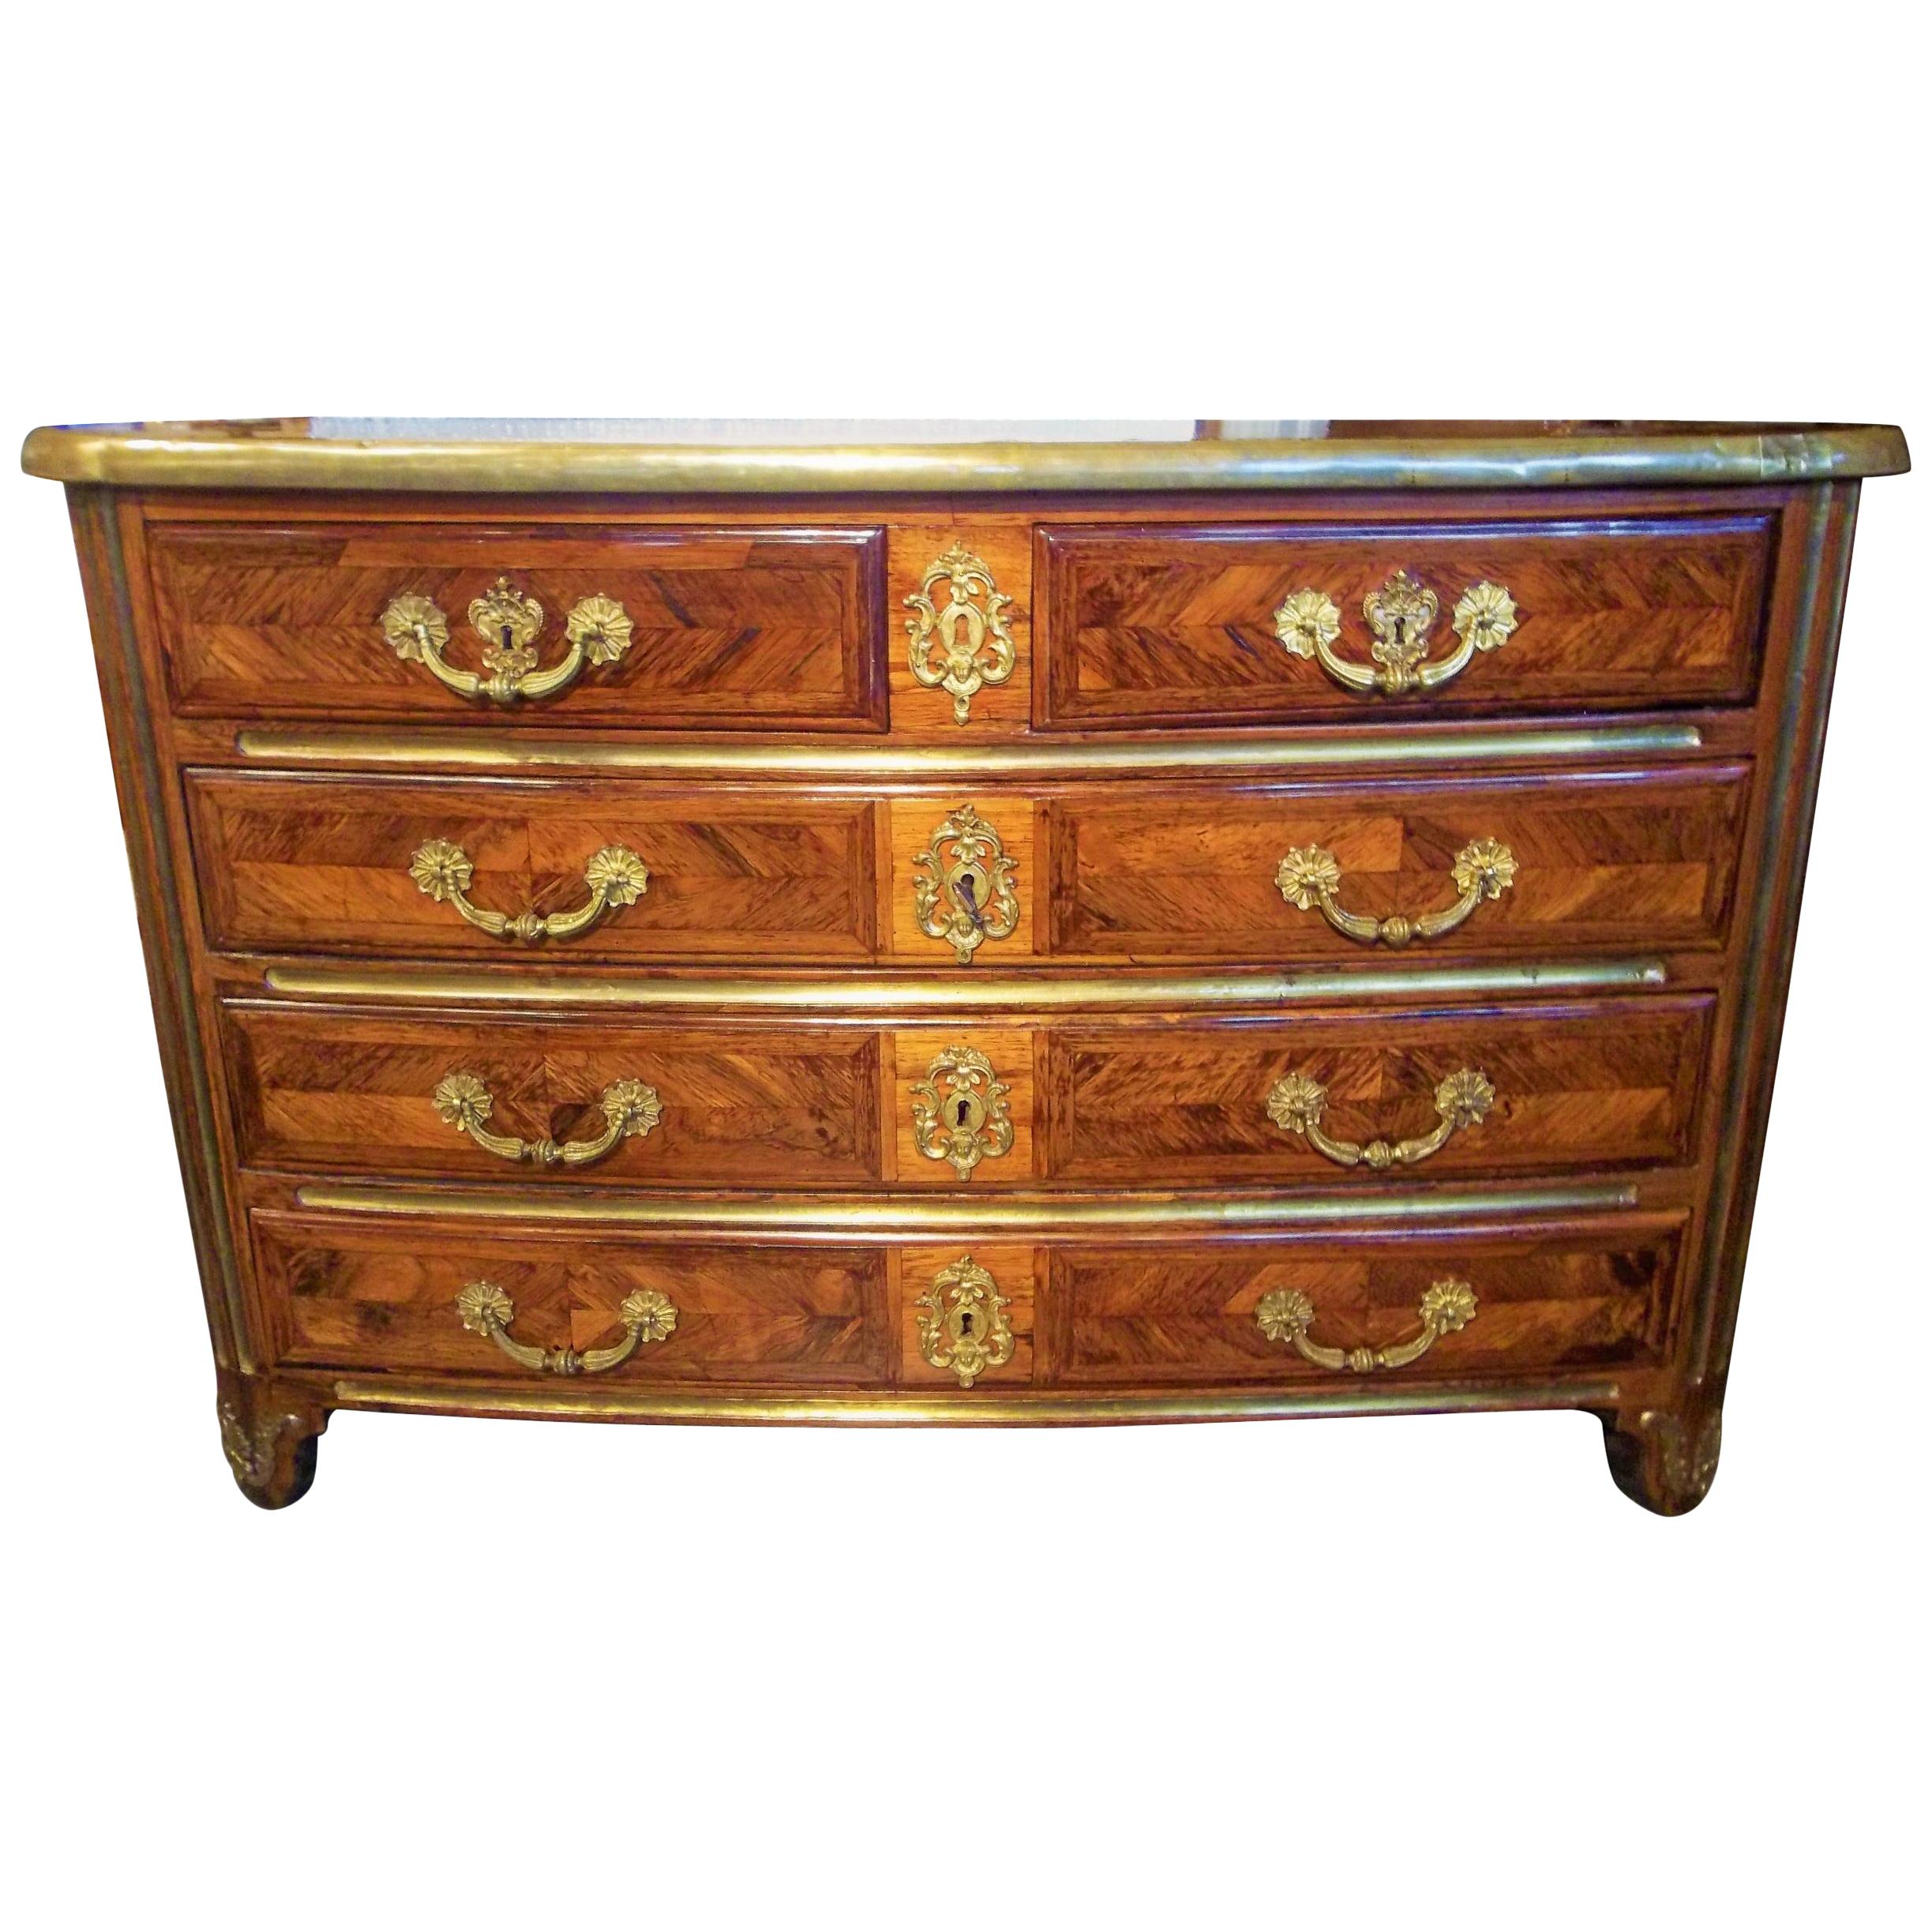 French Regence Kingwood Commode Early 18th Century with Gilded Mounts